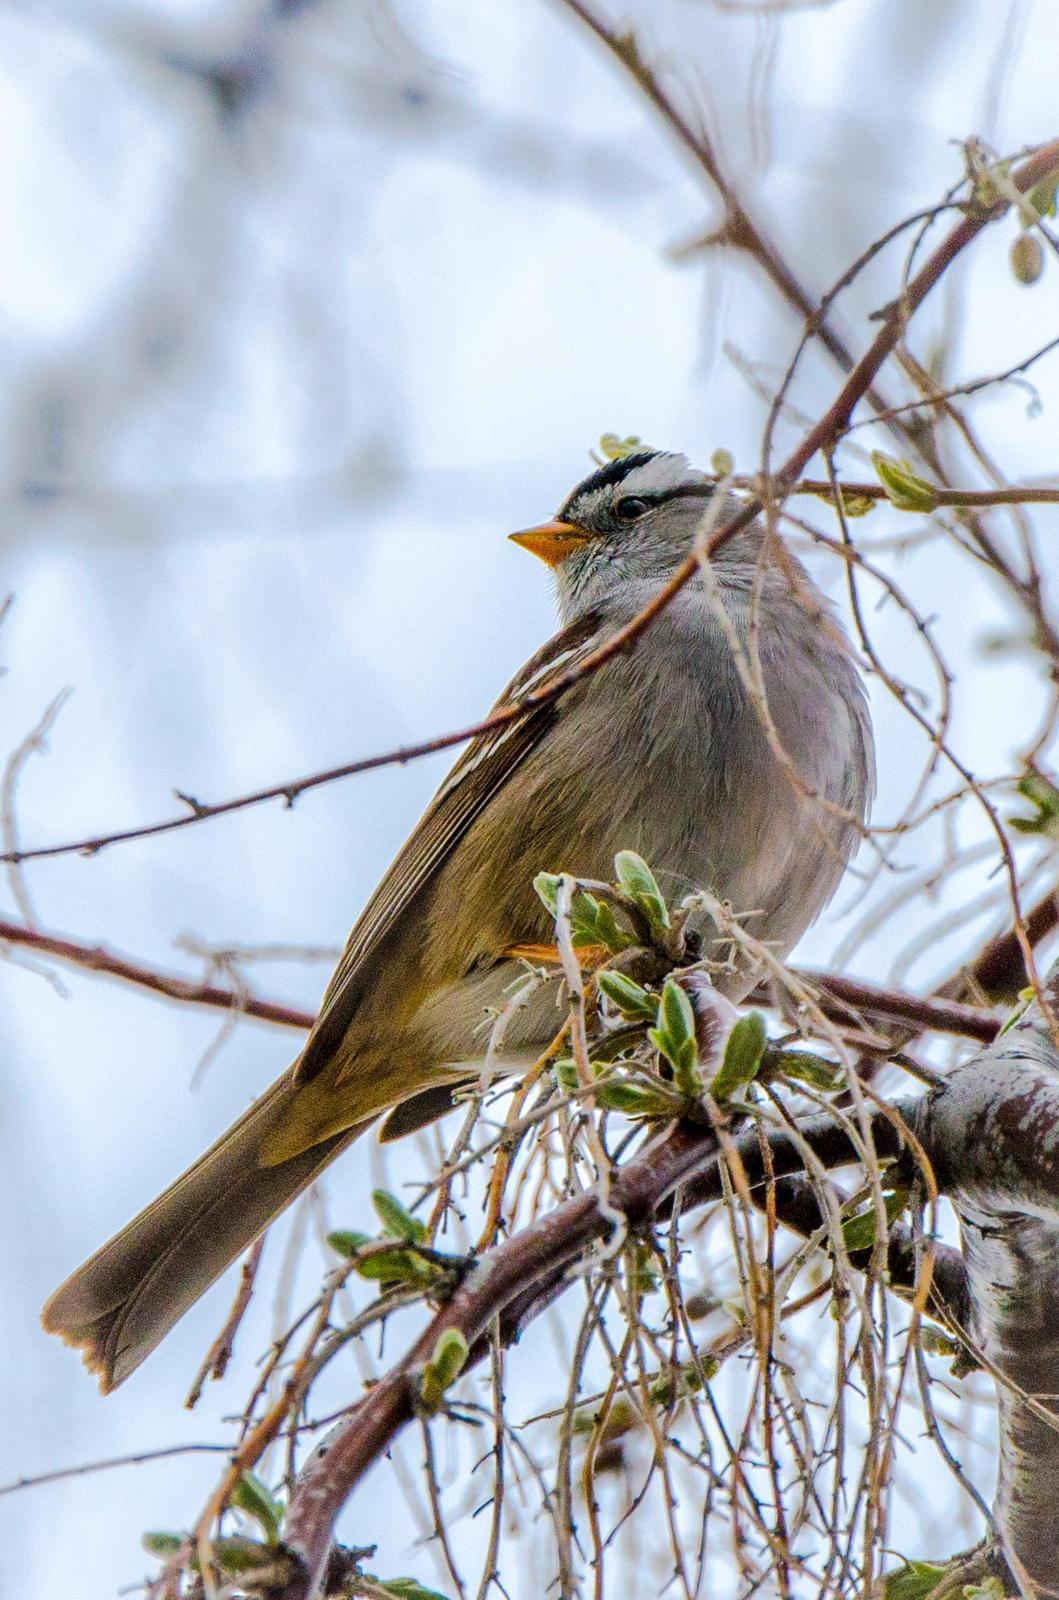 White-crowned Sparrow (pugetensis) Photo by Scott Yerges